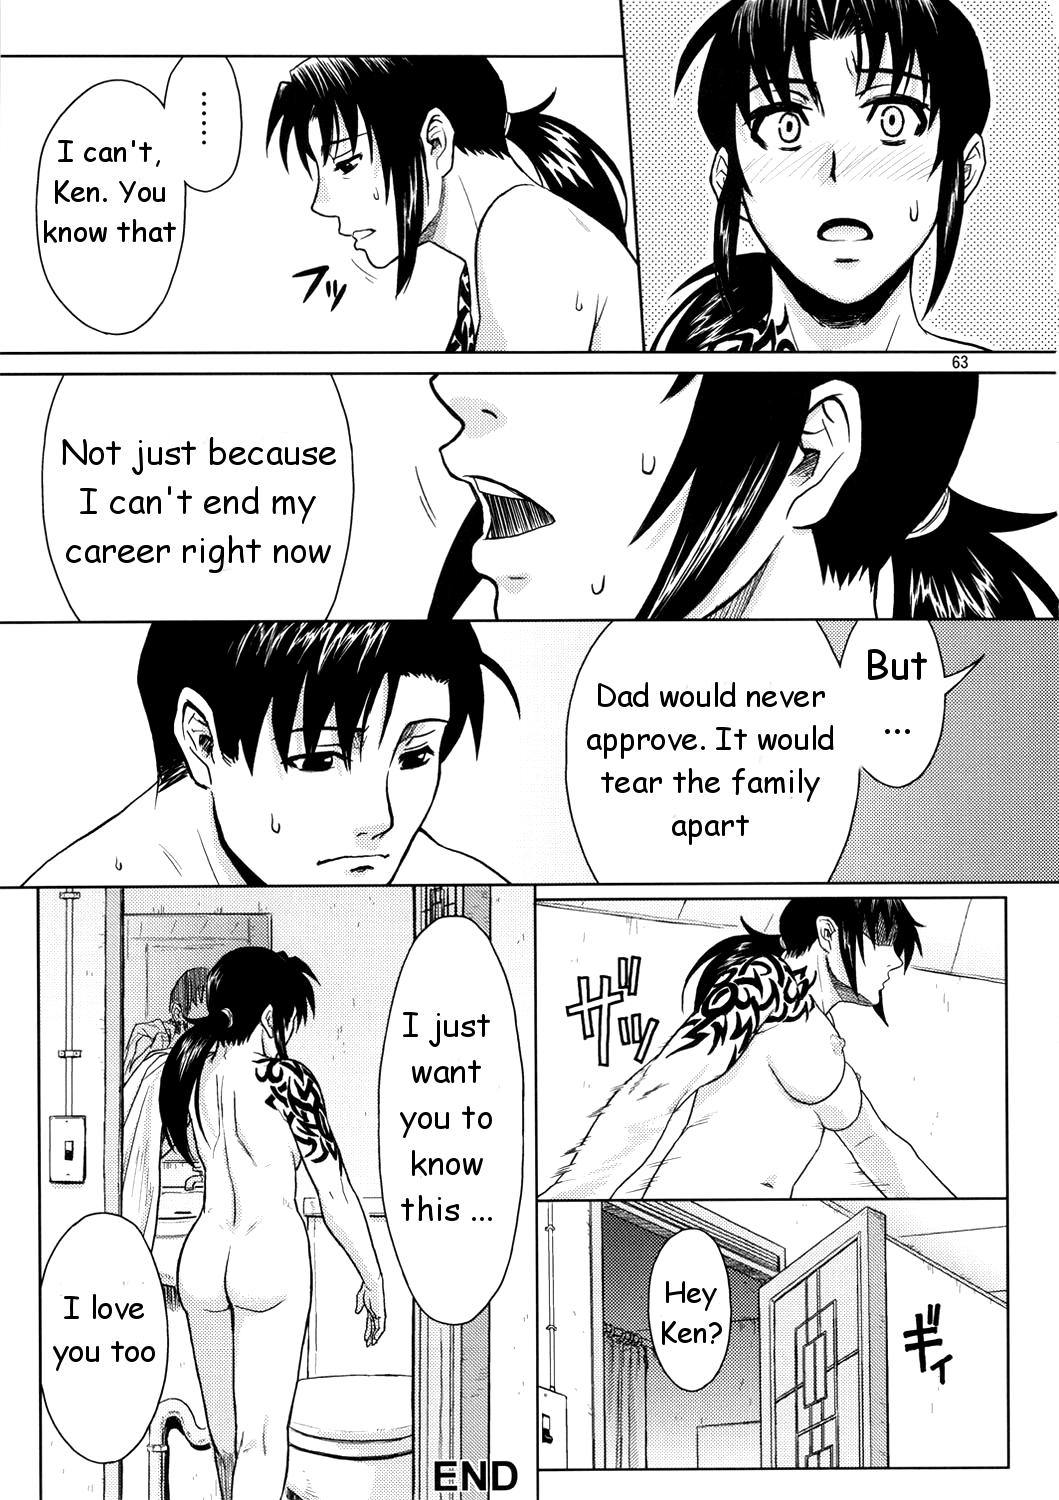 Private My Sister Is A Pornstar Part 1 - Black lagoon Hot Women Fucking - Page 51